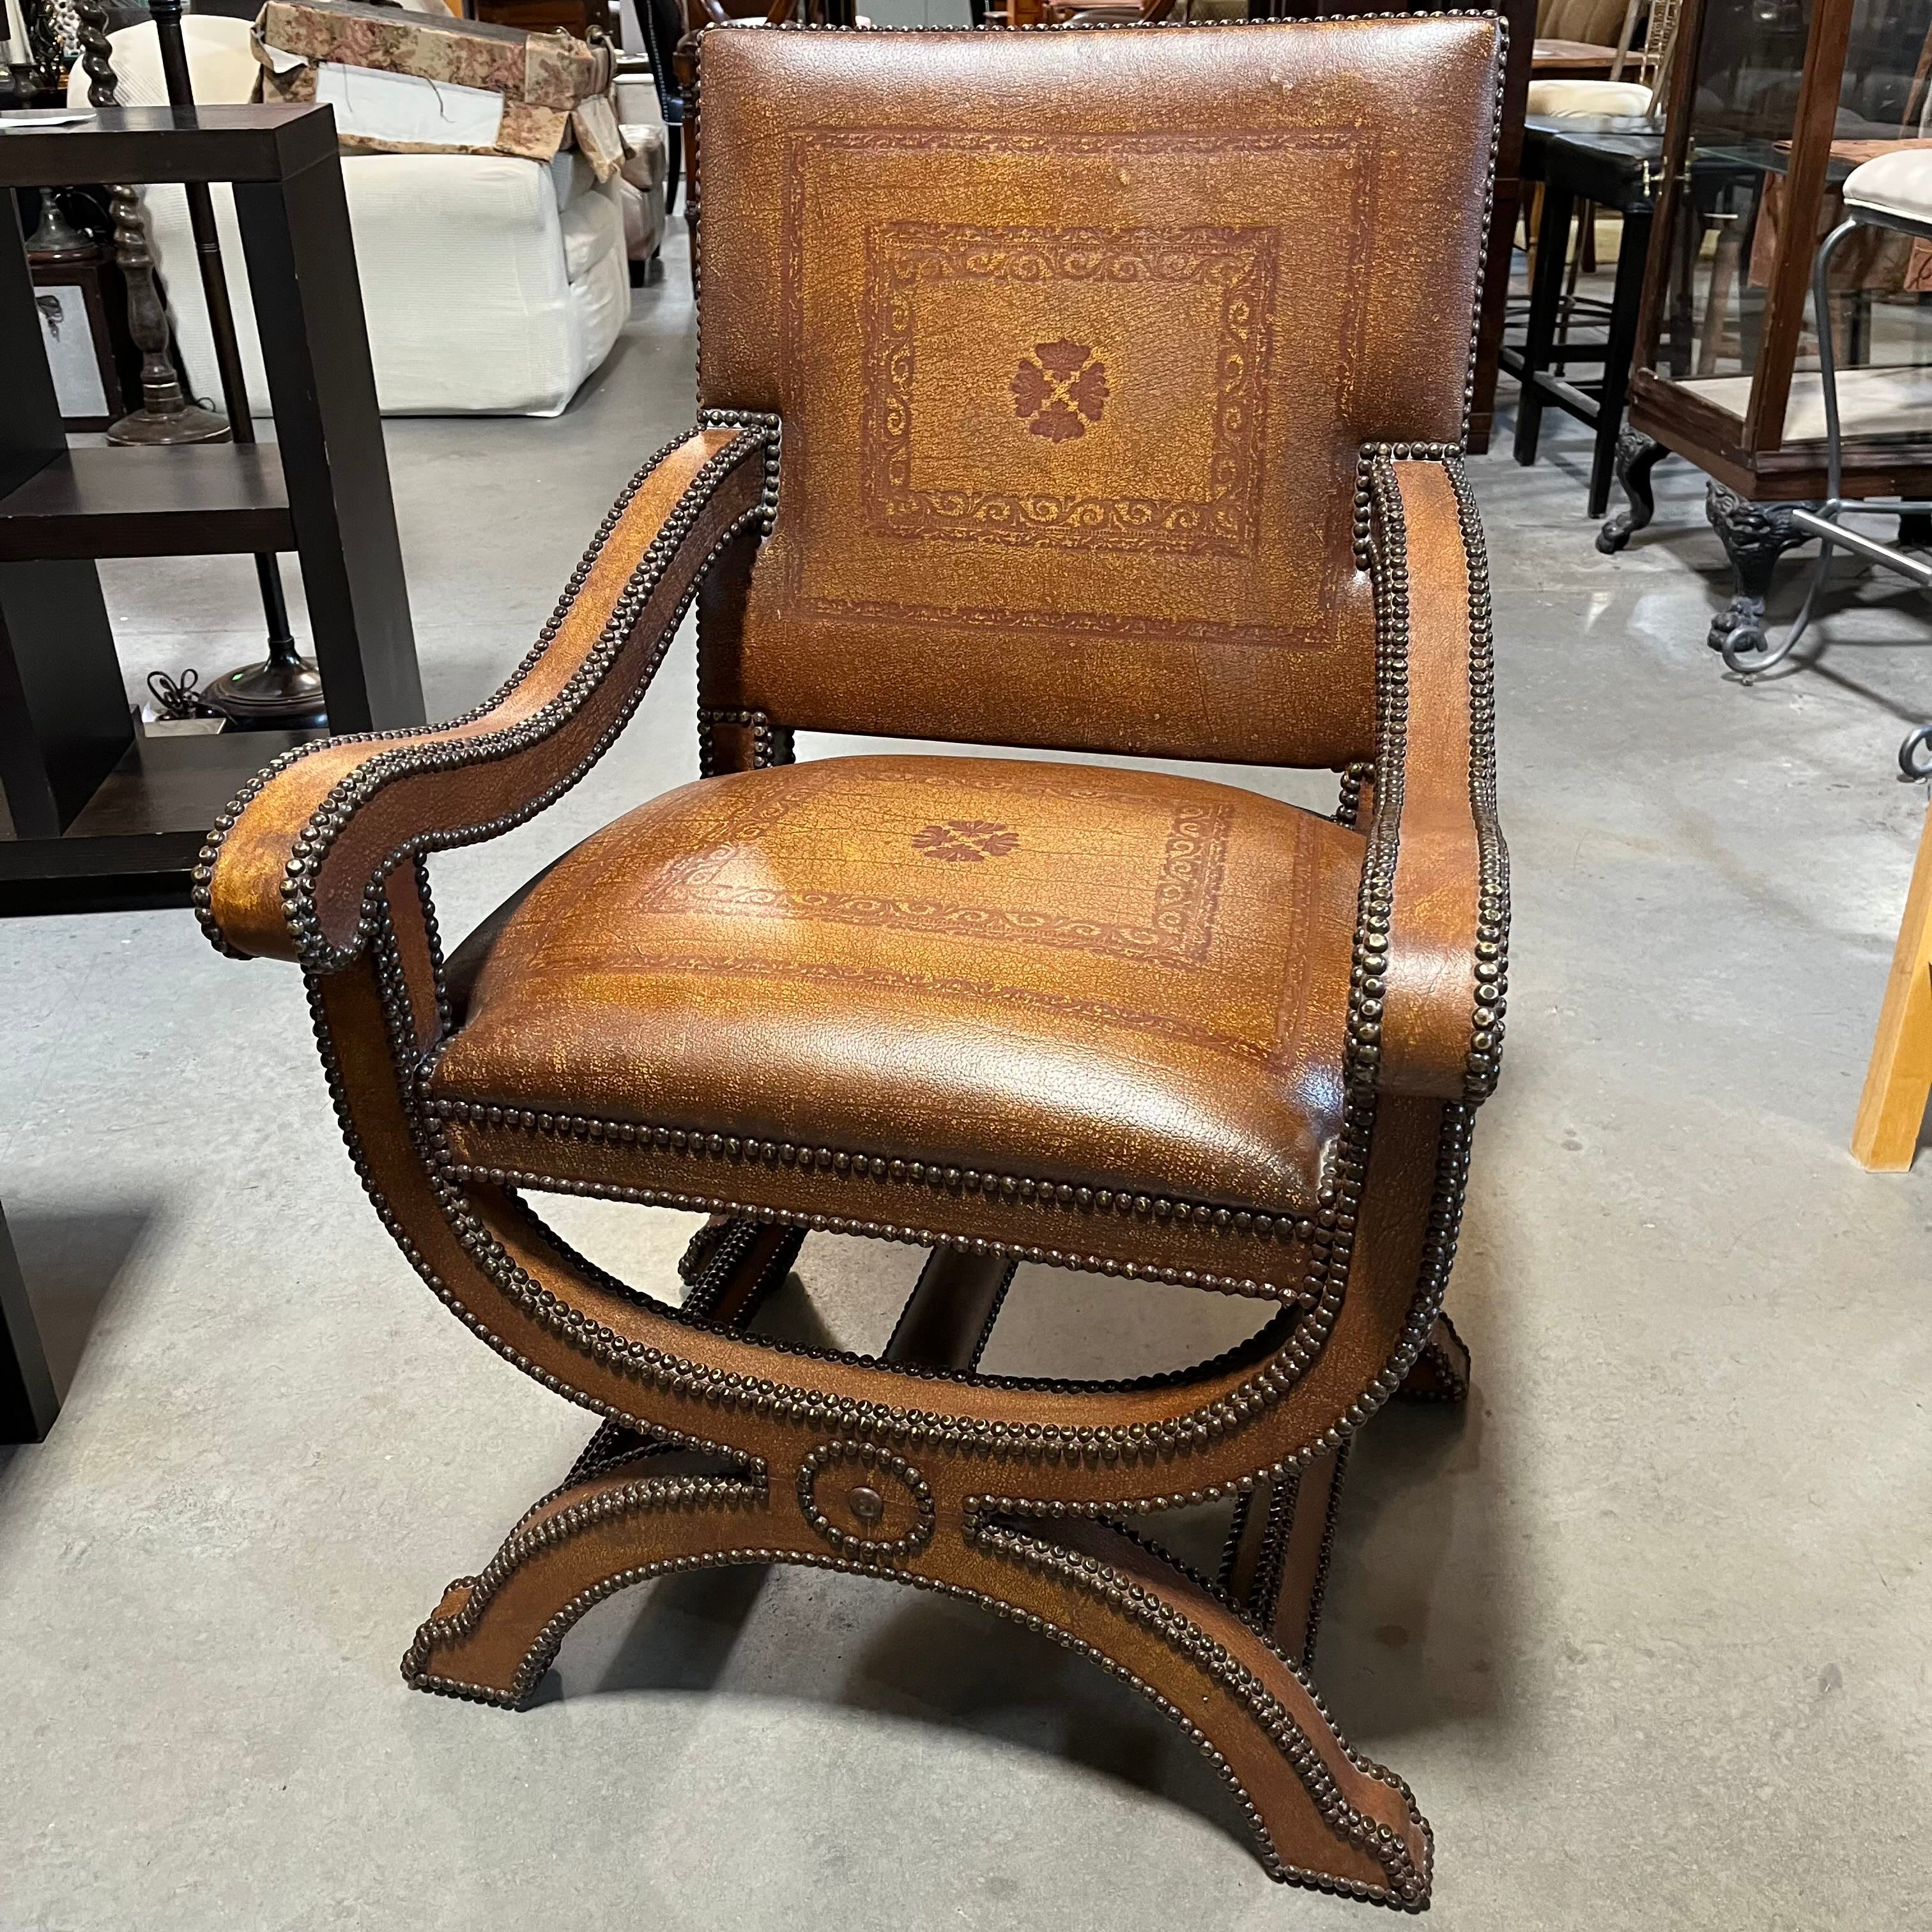 25"x 24"x 38.5" Theodore Alexander Embossed Stamped Leather Nailhead Chair